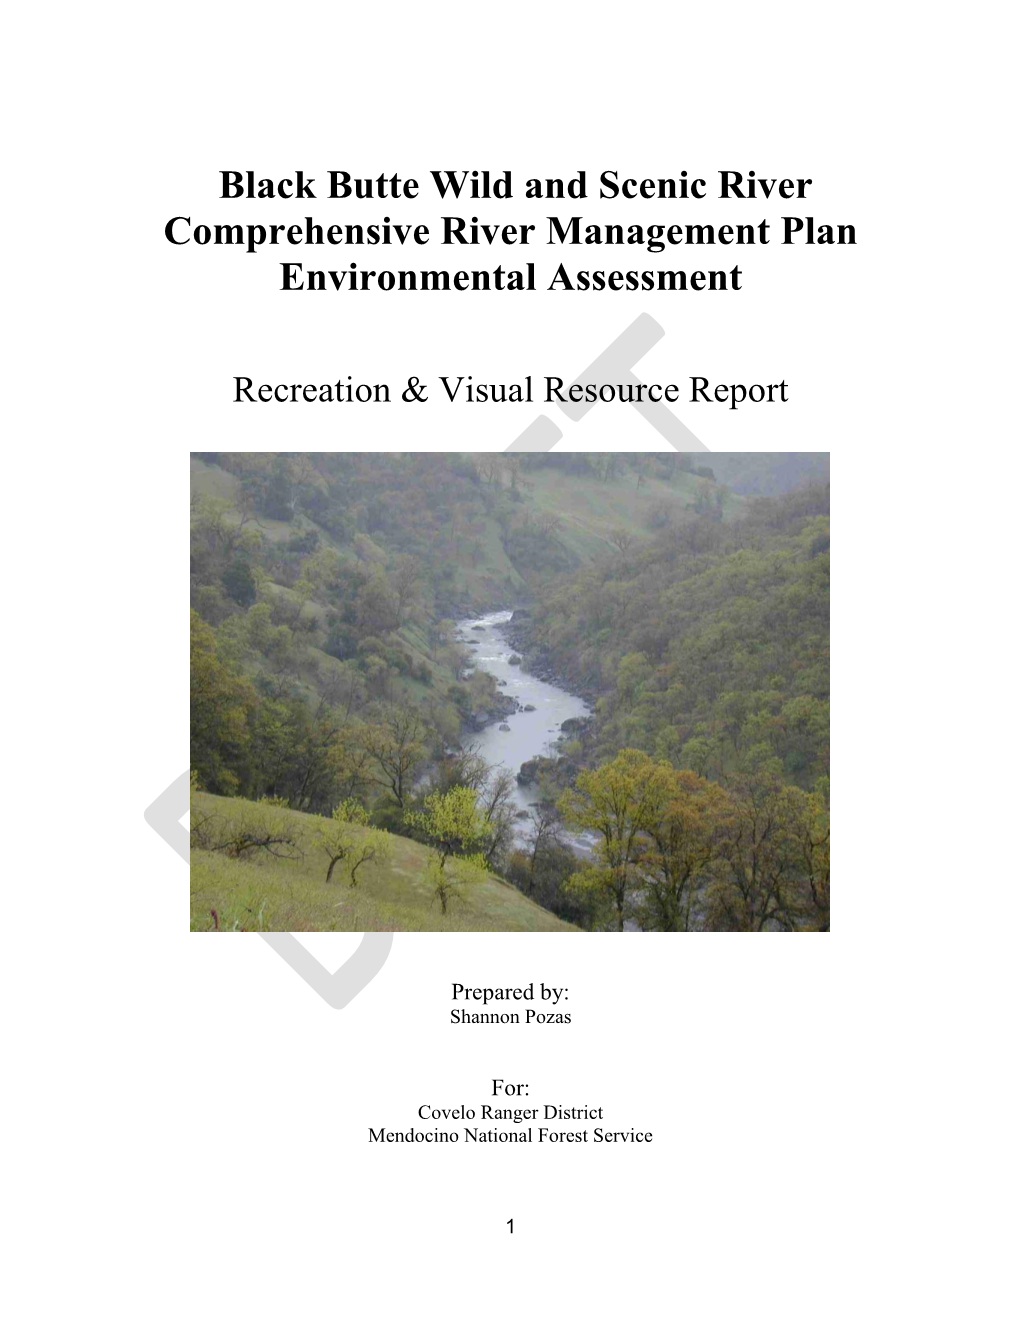 Black Butte Wild and Scenic River Comprehensive River Management Plan Environmental Assessment